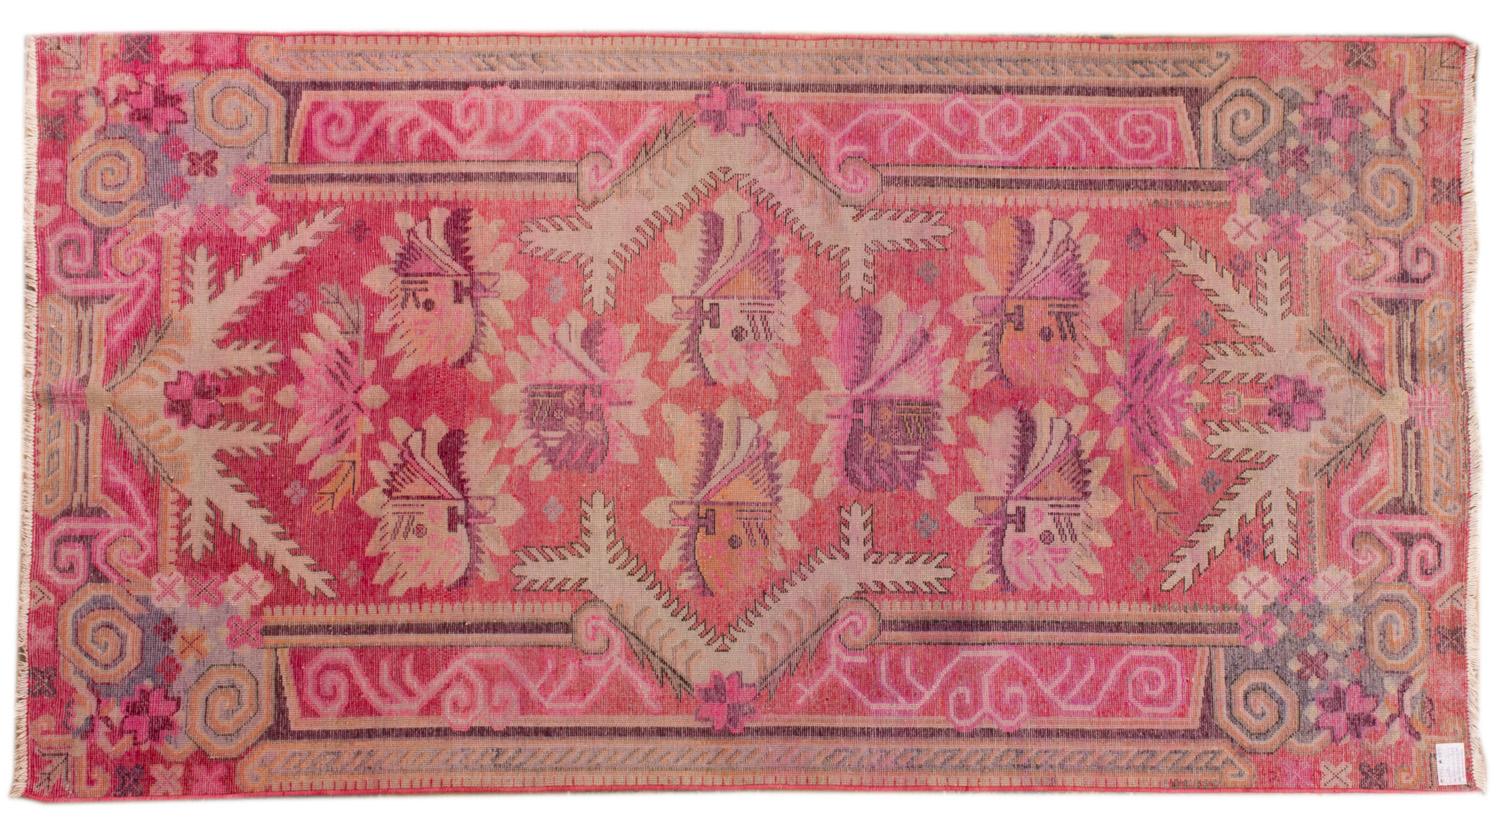 Cheerful pink color for this old Samarkand carpet, like a flowered garden, soft and pleasant to the touch - Samarkand: the famous town 